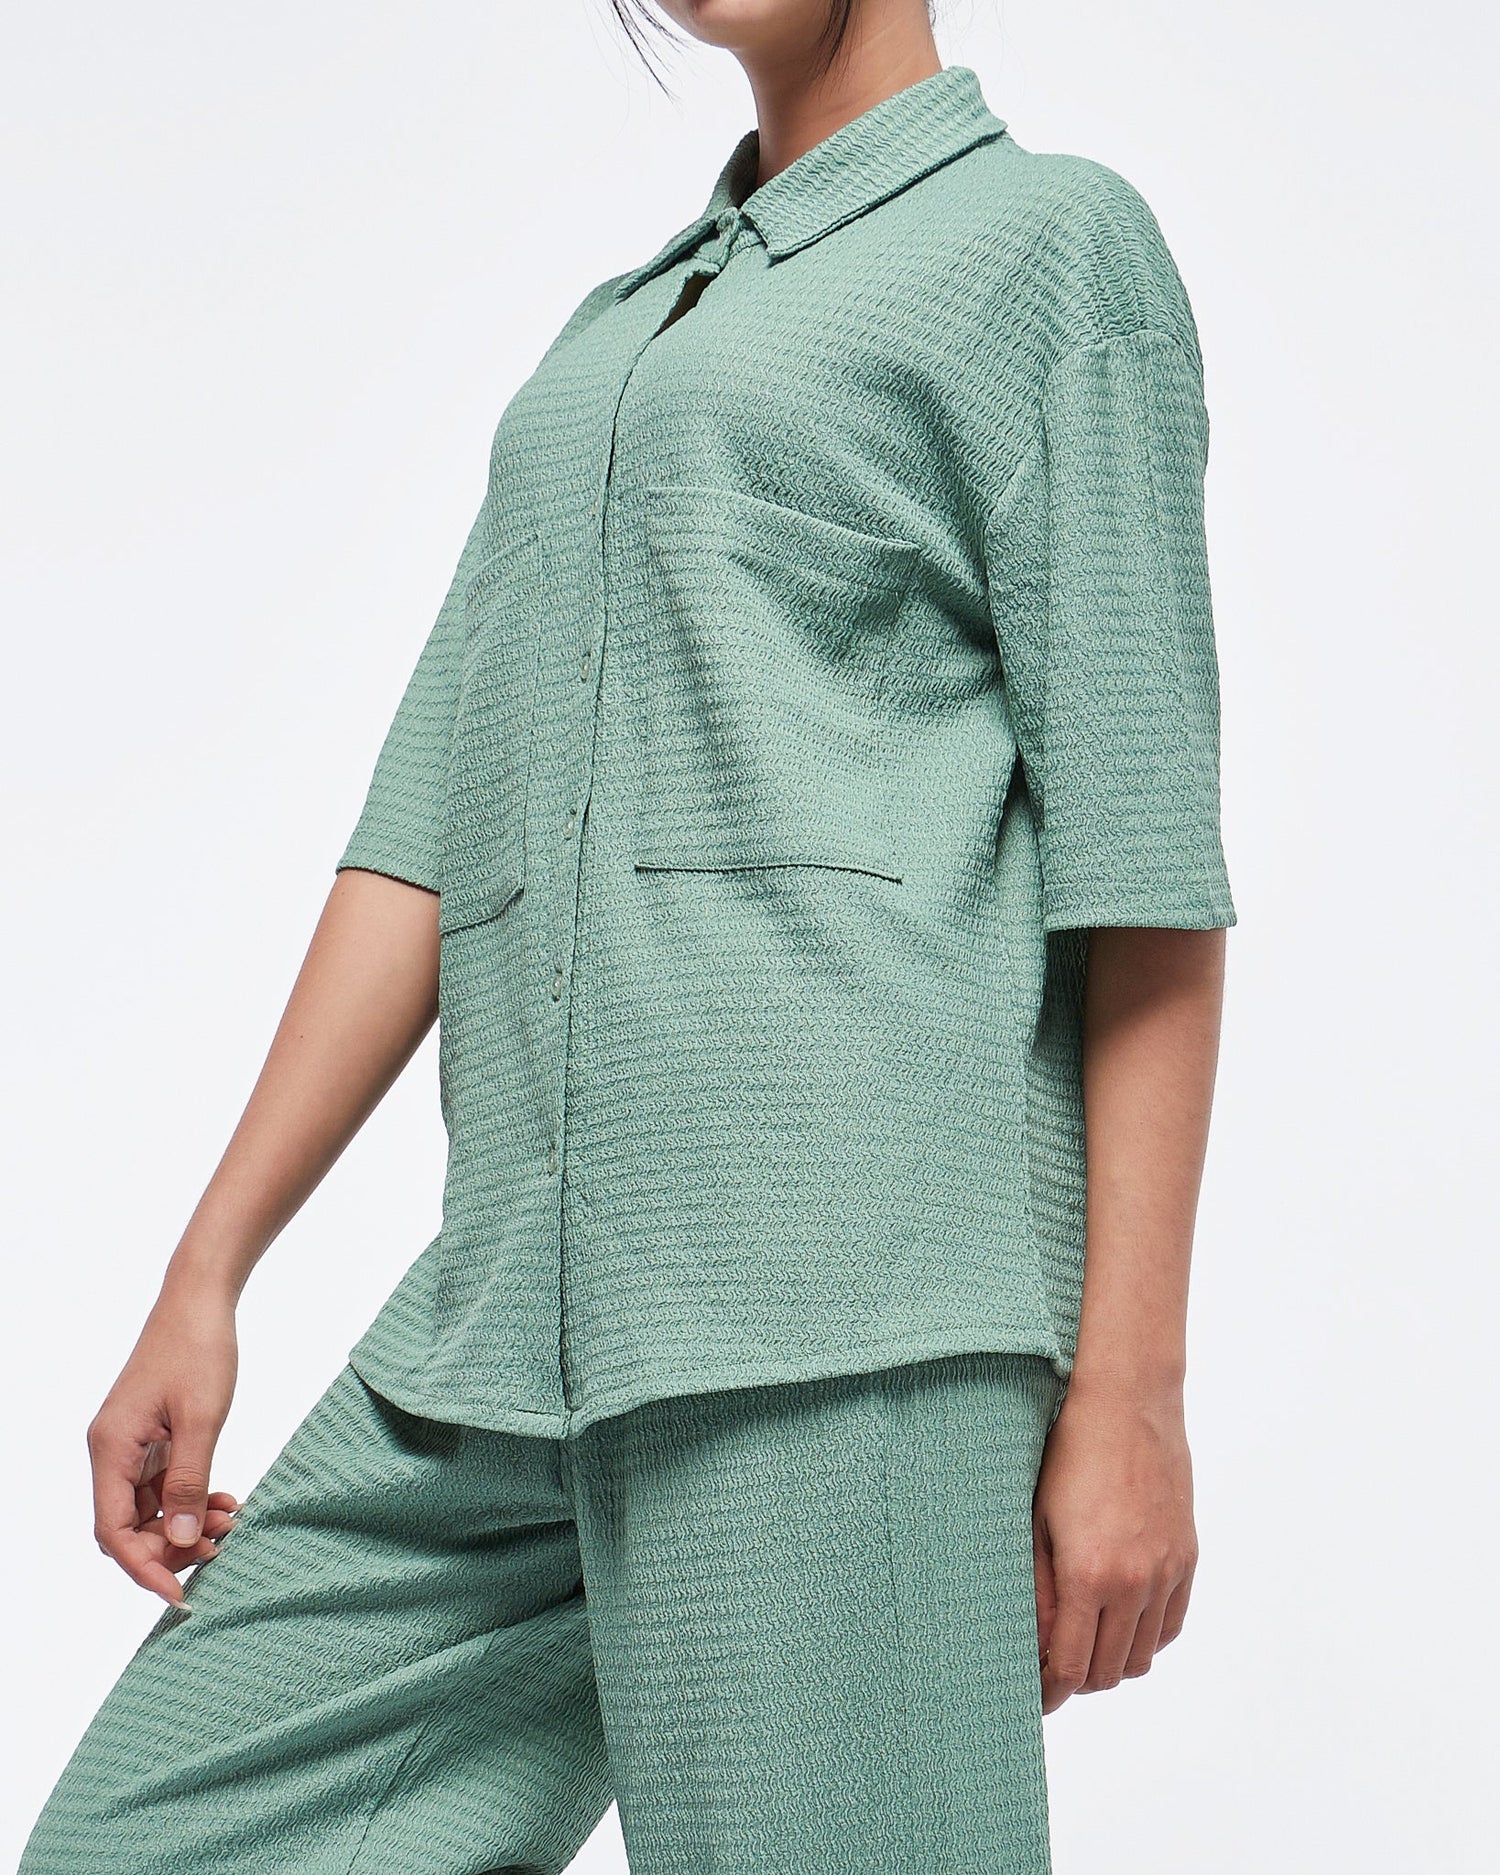 MOI OUTFIT-Front Pocket Lady Shirt Short Sleeve 12.90